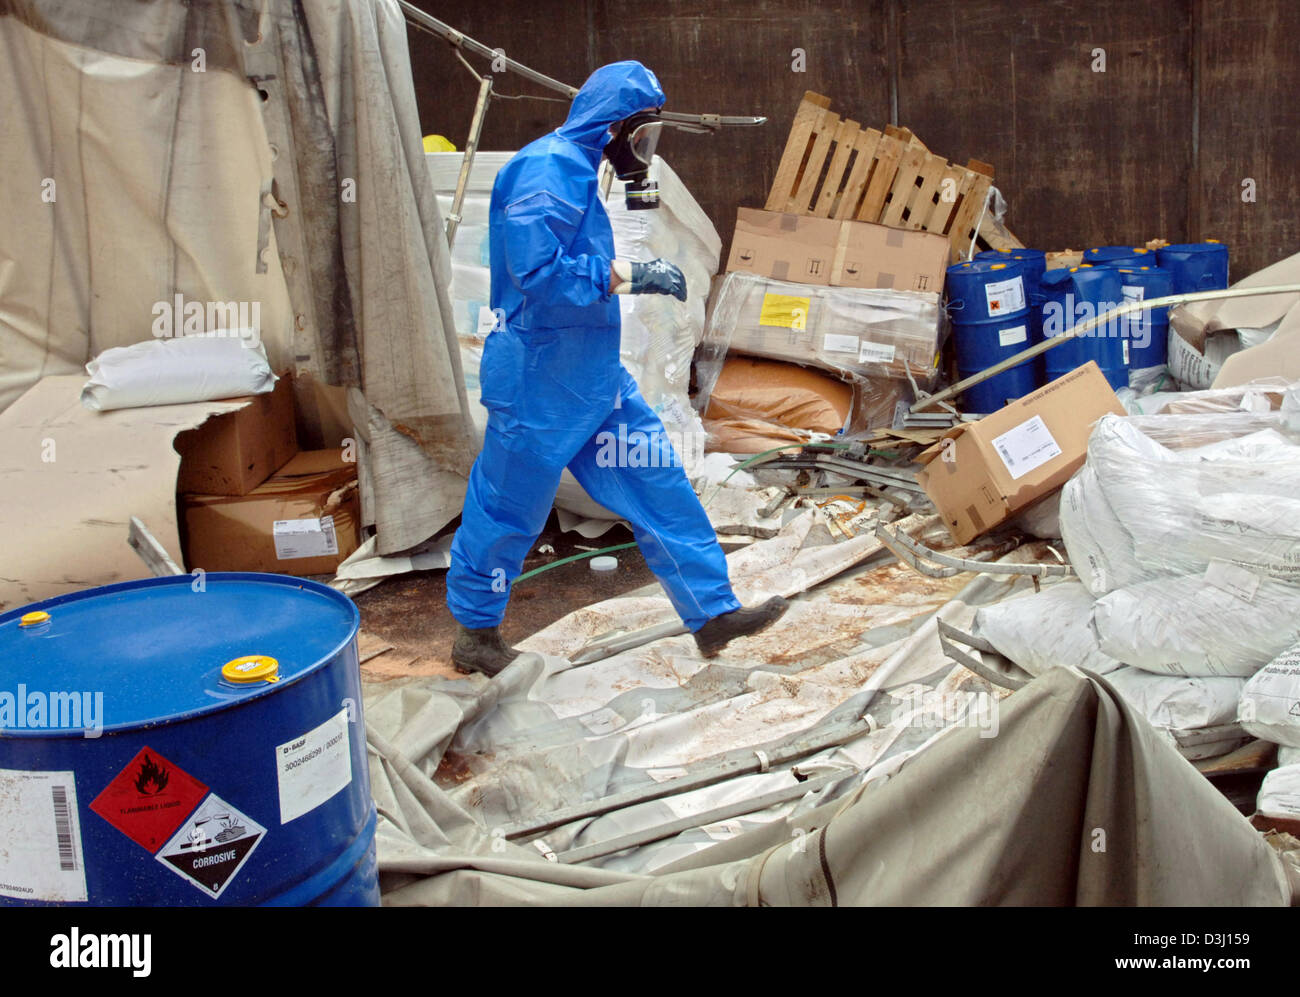 (dpa) - A fireman in protective blue clothing and mask salvages poisonous chemicals from a lorry which was involved in an accident on the A45 motorway near Wetzlar, Germany, Thursday, 30 June 2005. The driver of the lorry, which was loaded with hazardous material, apparently lost control over the vehicle for reasons unknown and smashed into a crash barrier where the tractor-trailer Stock Photo